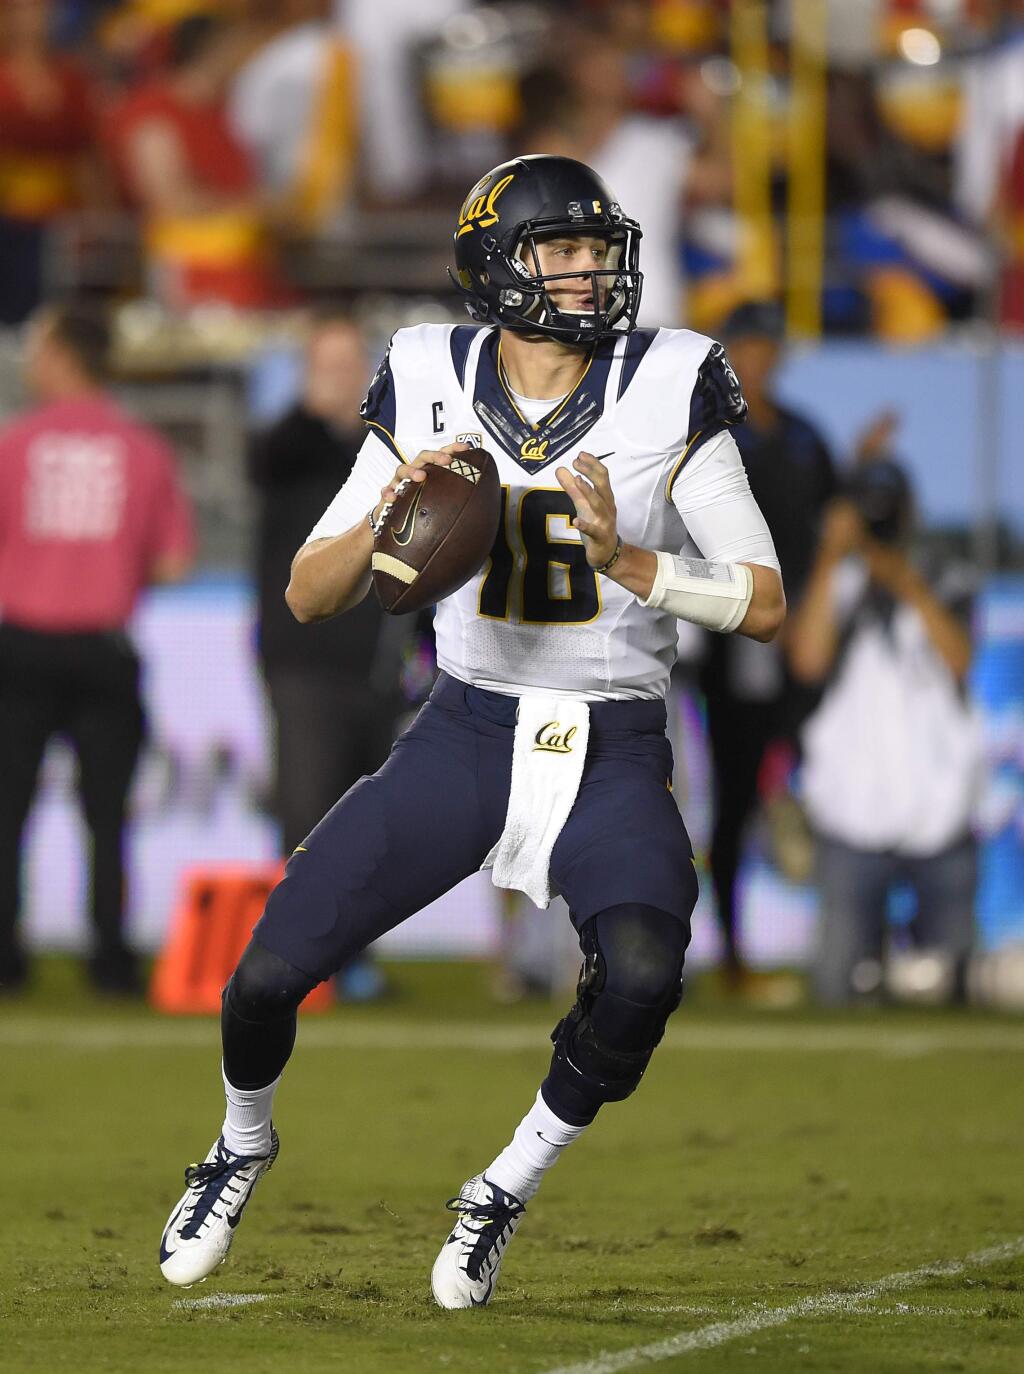 In this Oct. 22, 2015, file photo, California quarterback Jared Goff passes against UCLA in Pasadena. Behind talented quarterback Jared Goff and an improved defense in coach Sonny Dykes' third year, the Bears are bowl eligible for the first time since 2011 and are seeking their first Big Game win since 2009. (AP Photo/Mark J. Terrill, File)